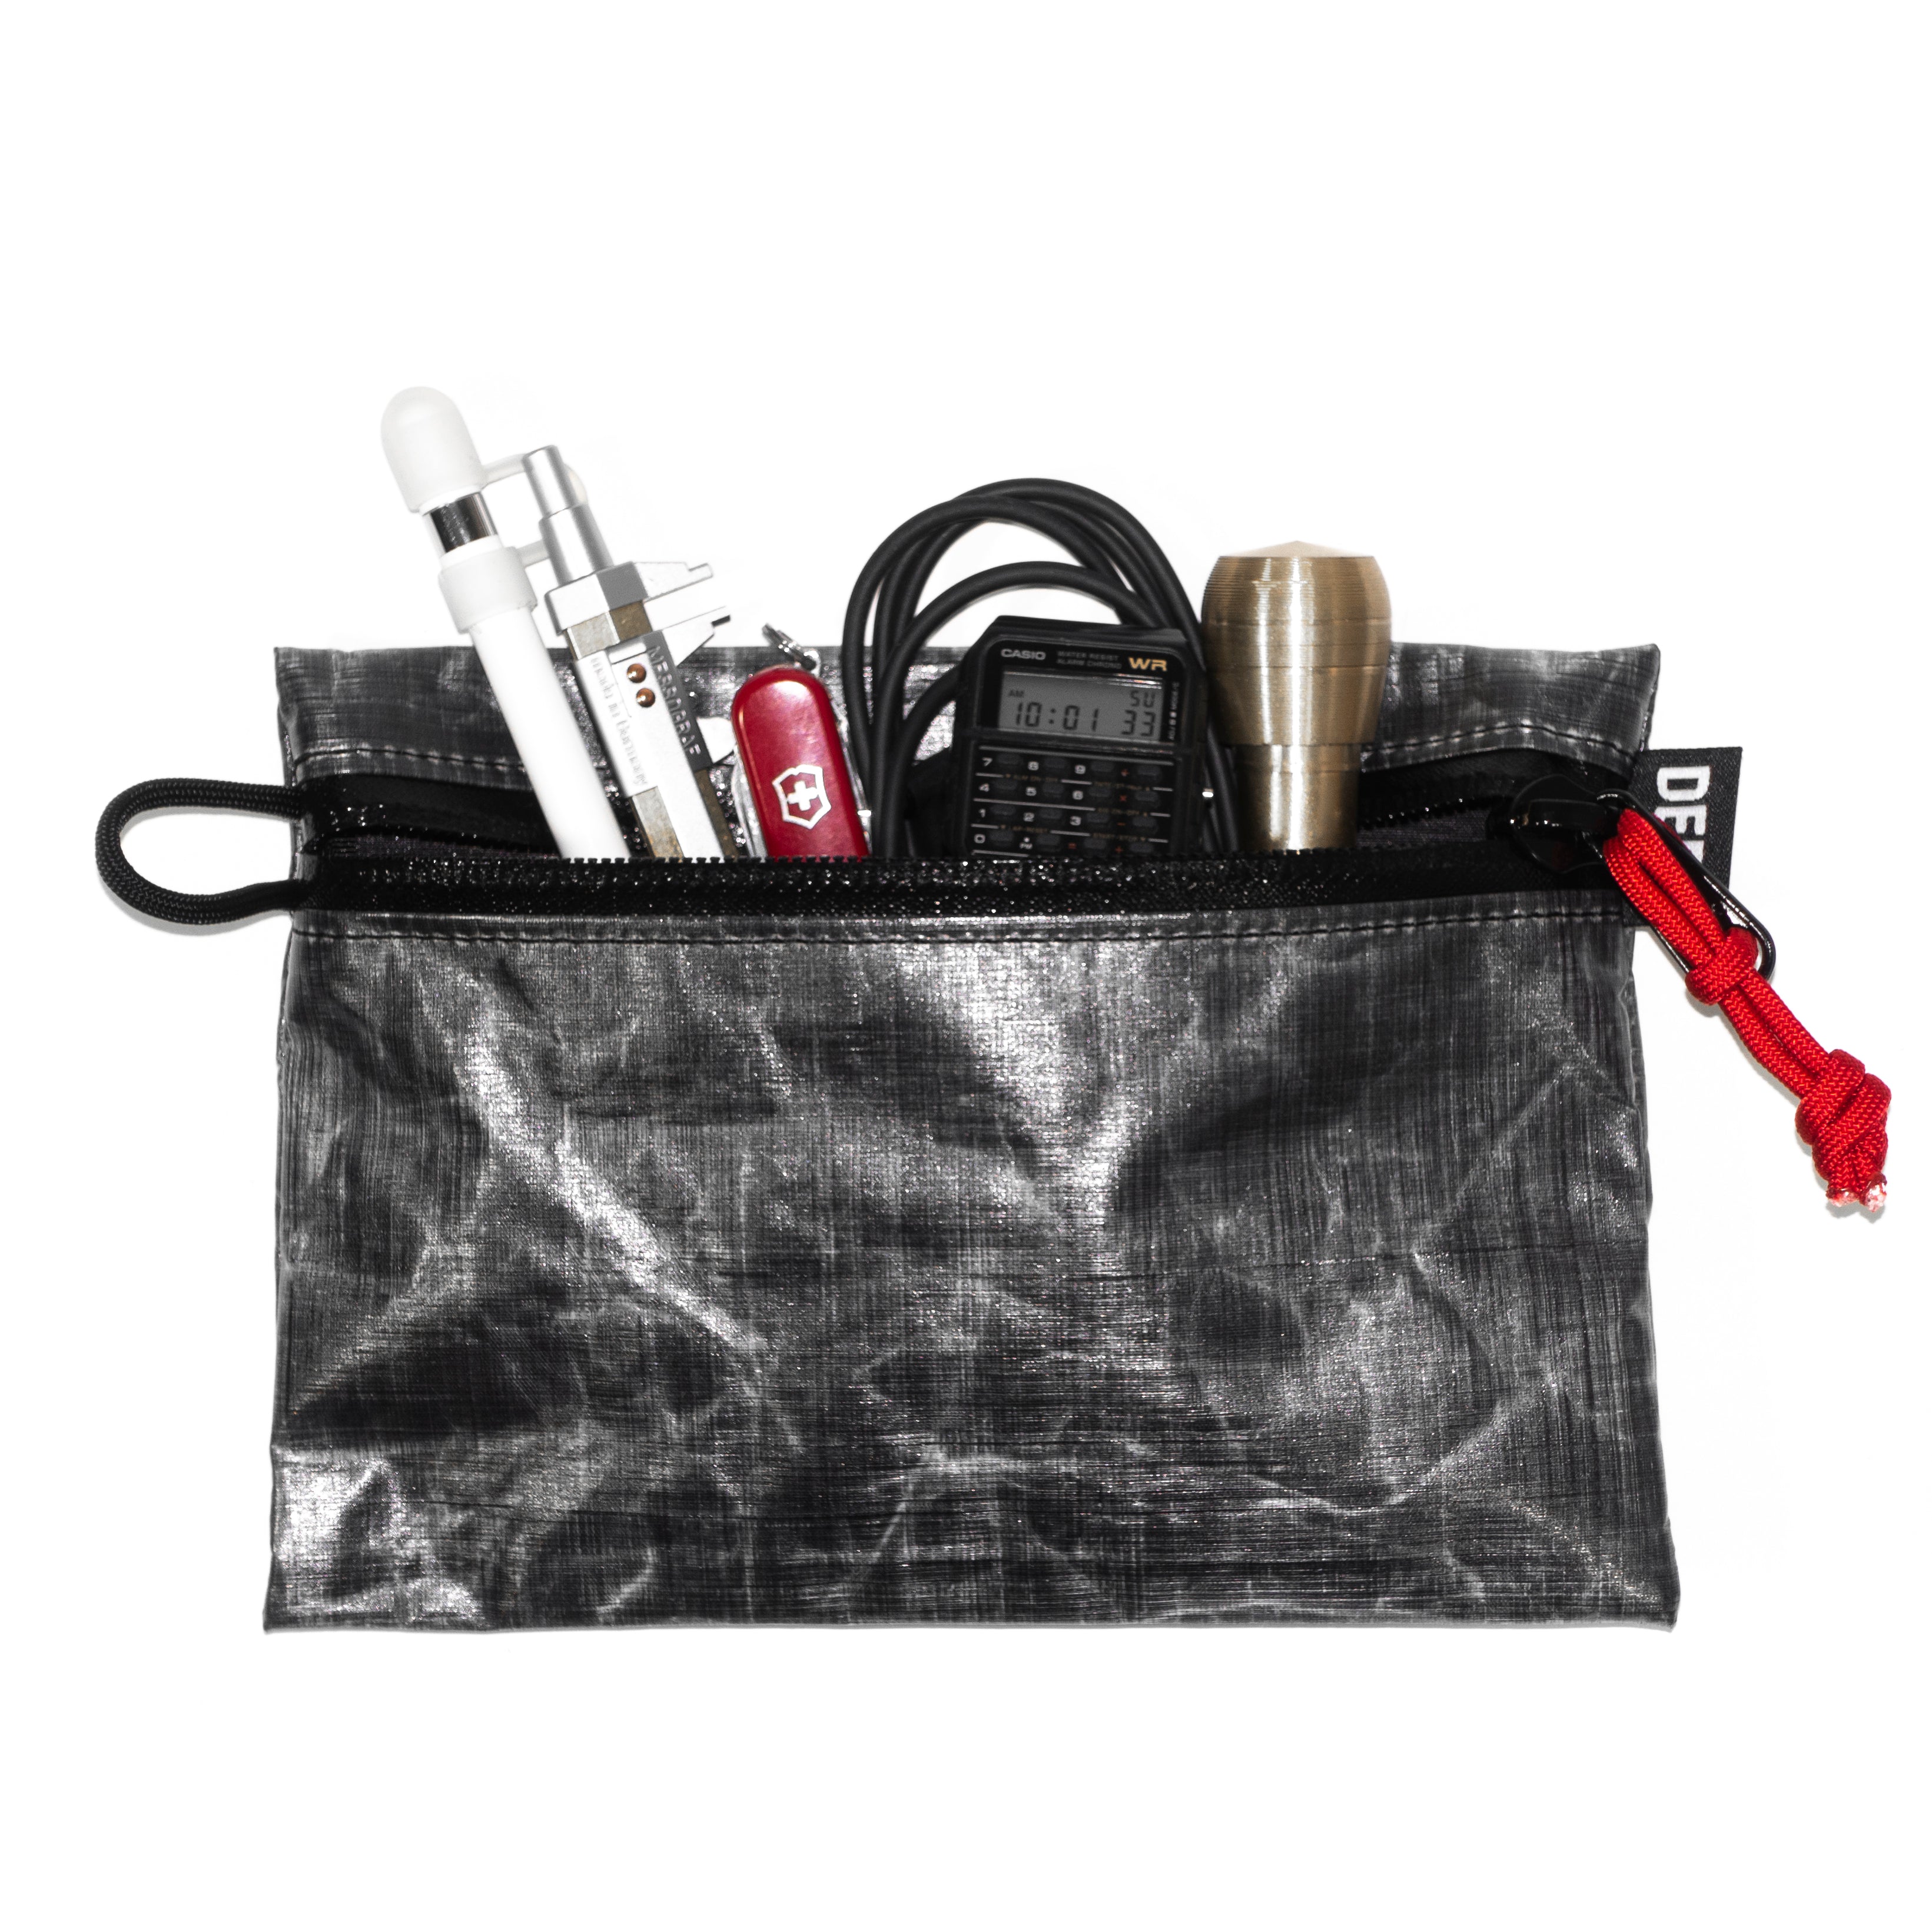 Omnicolor Solids - Zipper Pouch Kit with Dyneema® Composite Fabric